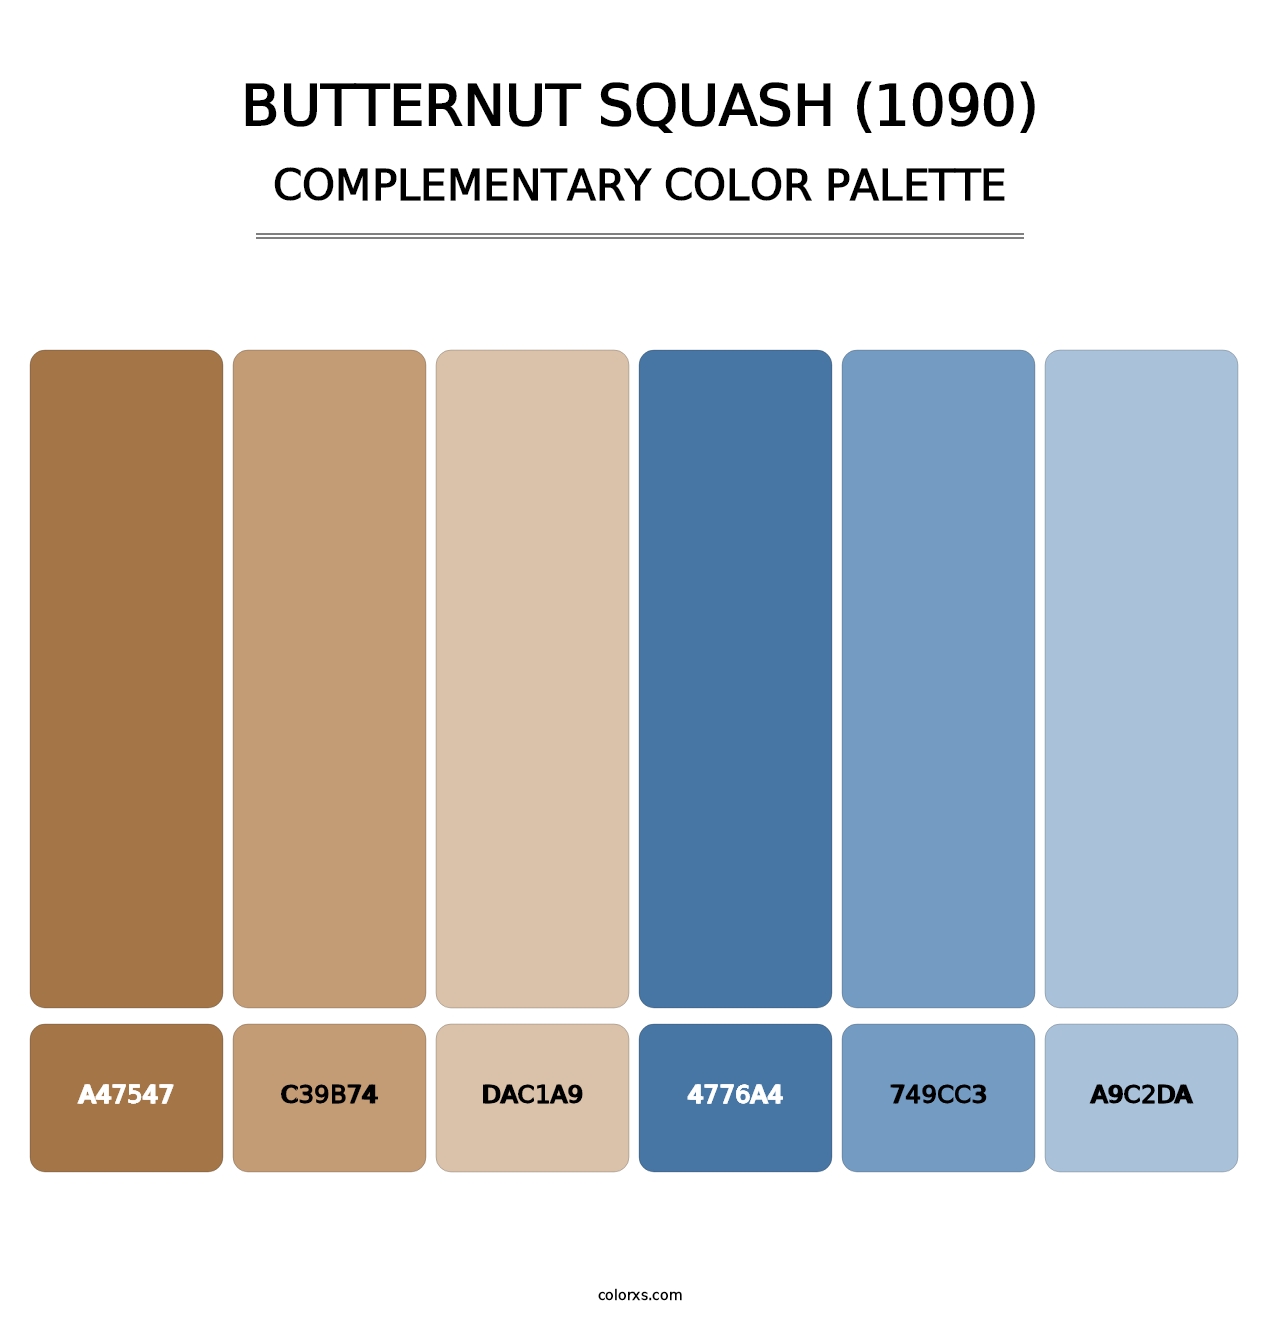 Butternut Squash (1090) - Complementary Color Palette